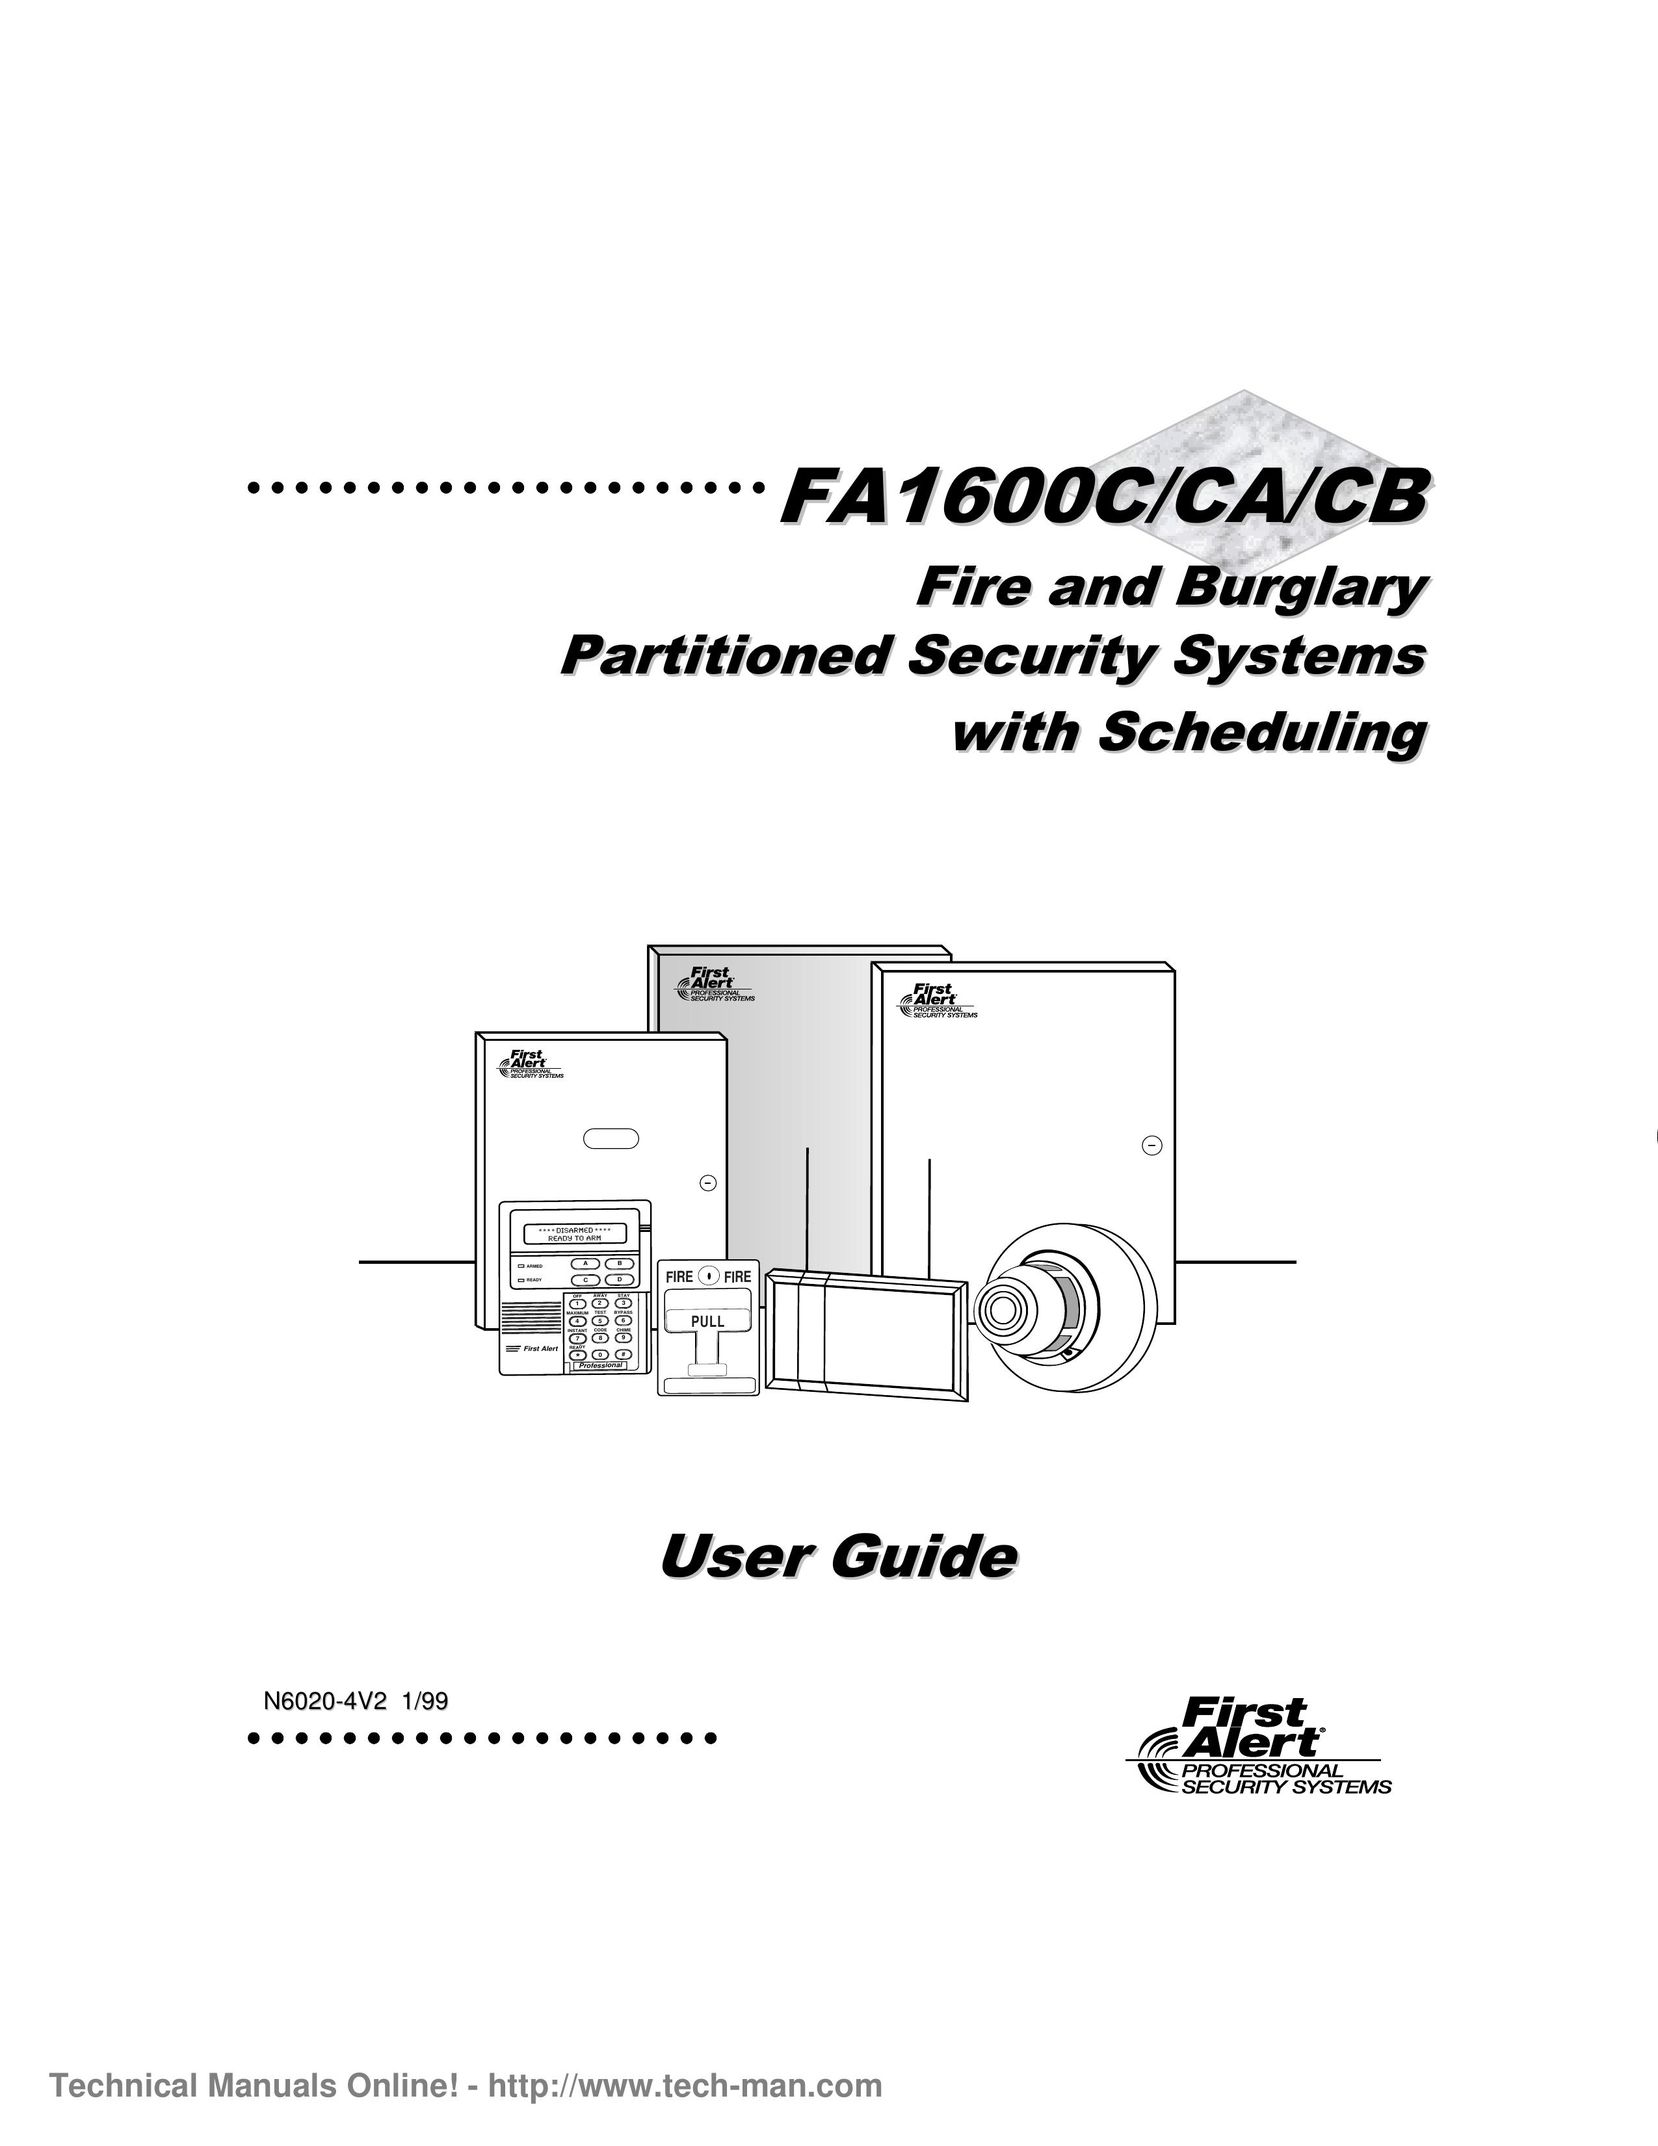 First Alert FA1600C Home Security System User Manual